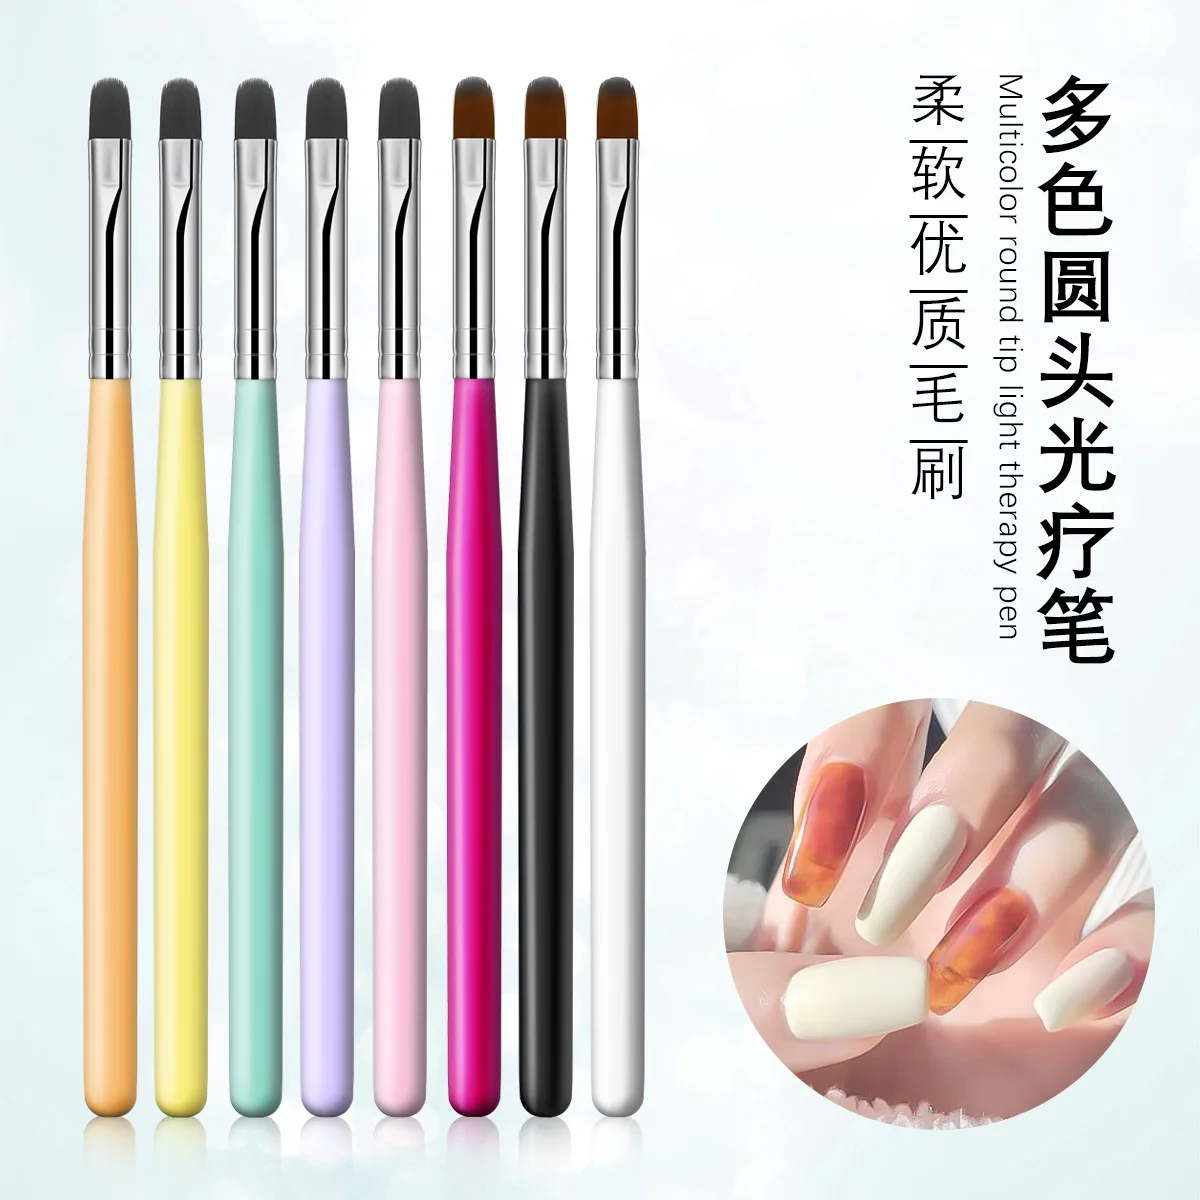 

1PC Nails Art Brush Pattern Phototherapy Acrylic UV Gel Extension Builder Coating Painting Pen DIY Manicure Accessories Tool